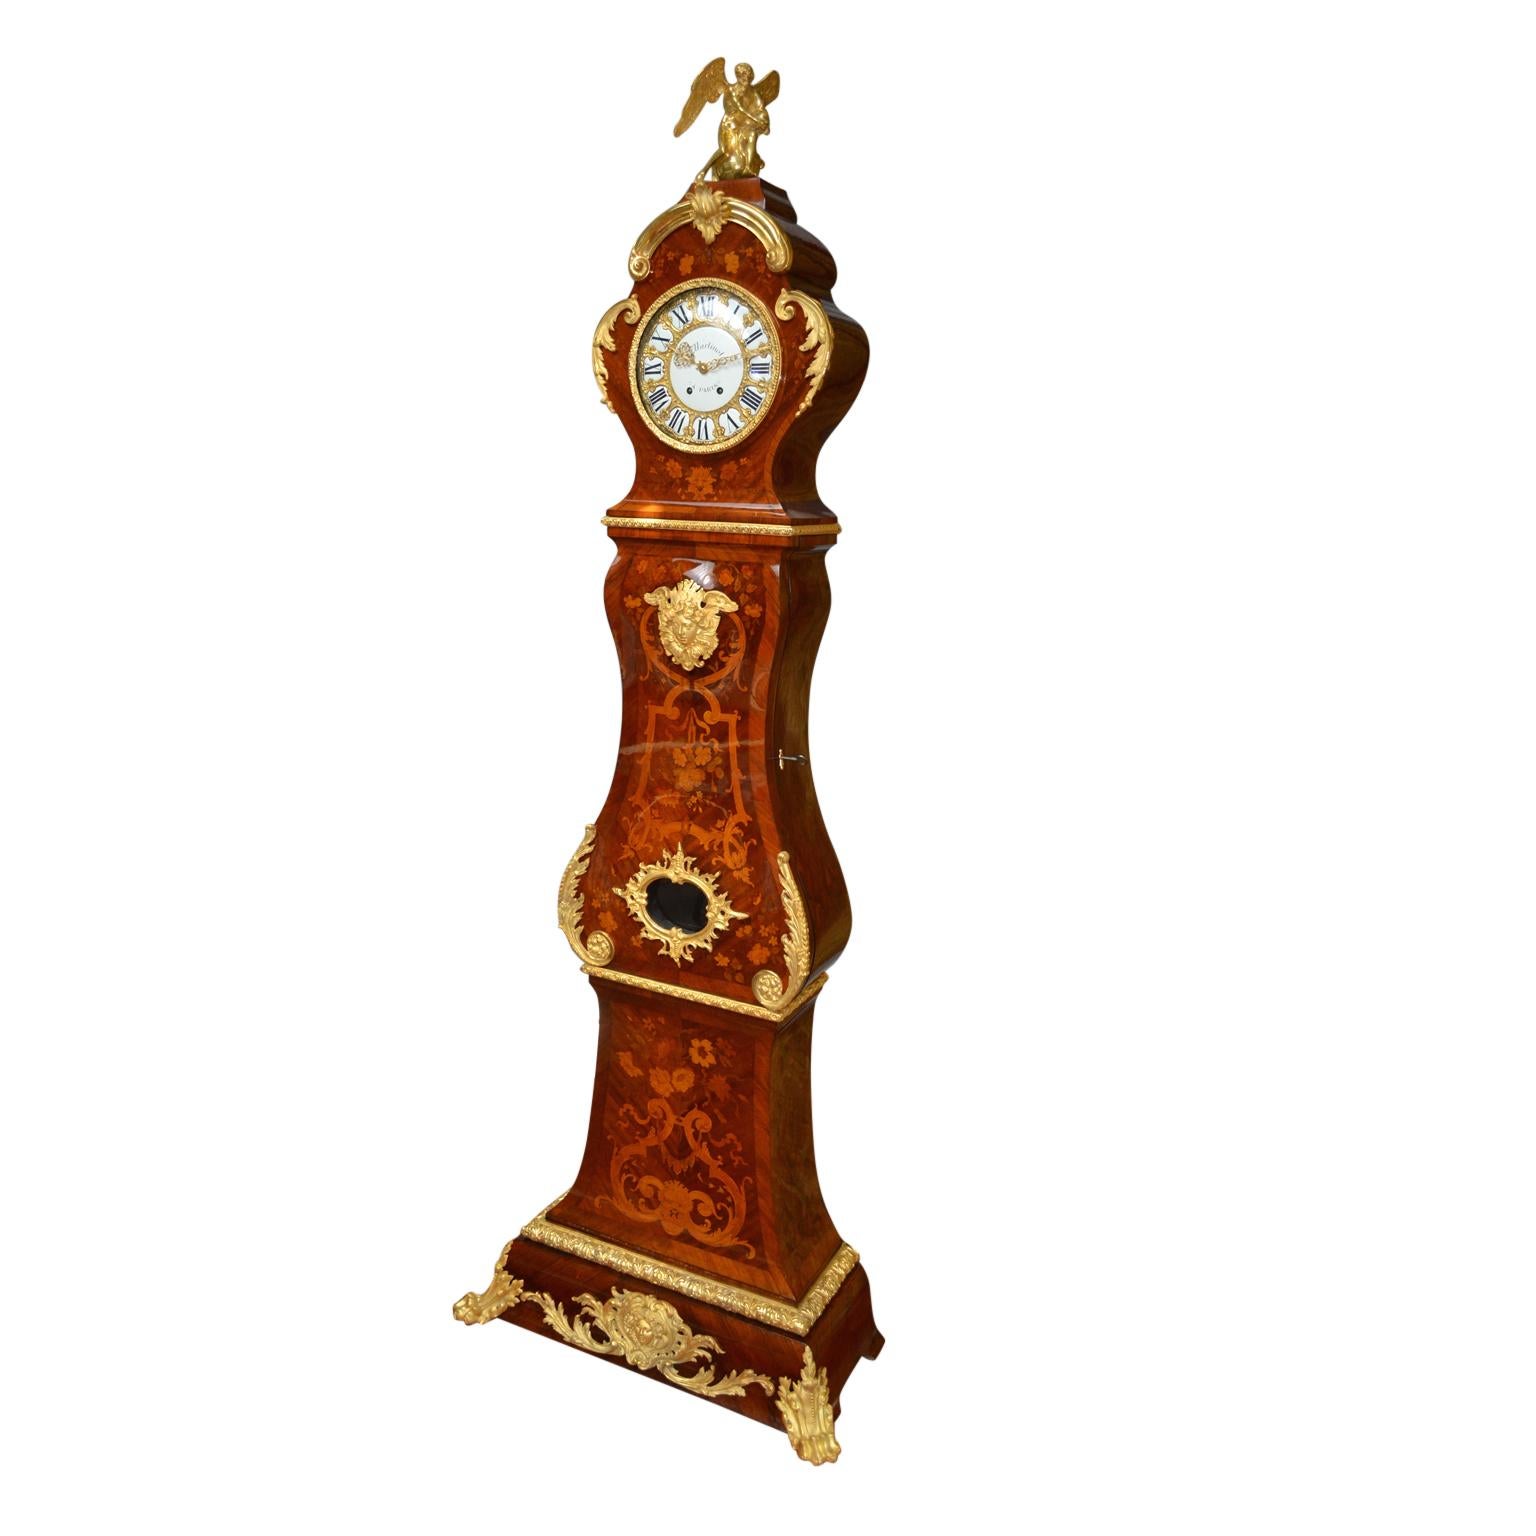 A superb quality French Louis XV style marquetry and gilt bronze longcase clock. The case of this clock is modelled after those made by the 18th century cabinetmaker Balthazar Lieutaud. The shaped marquetry oak carcass is completely veneered in